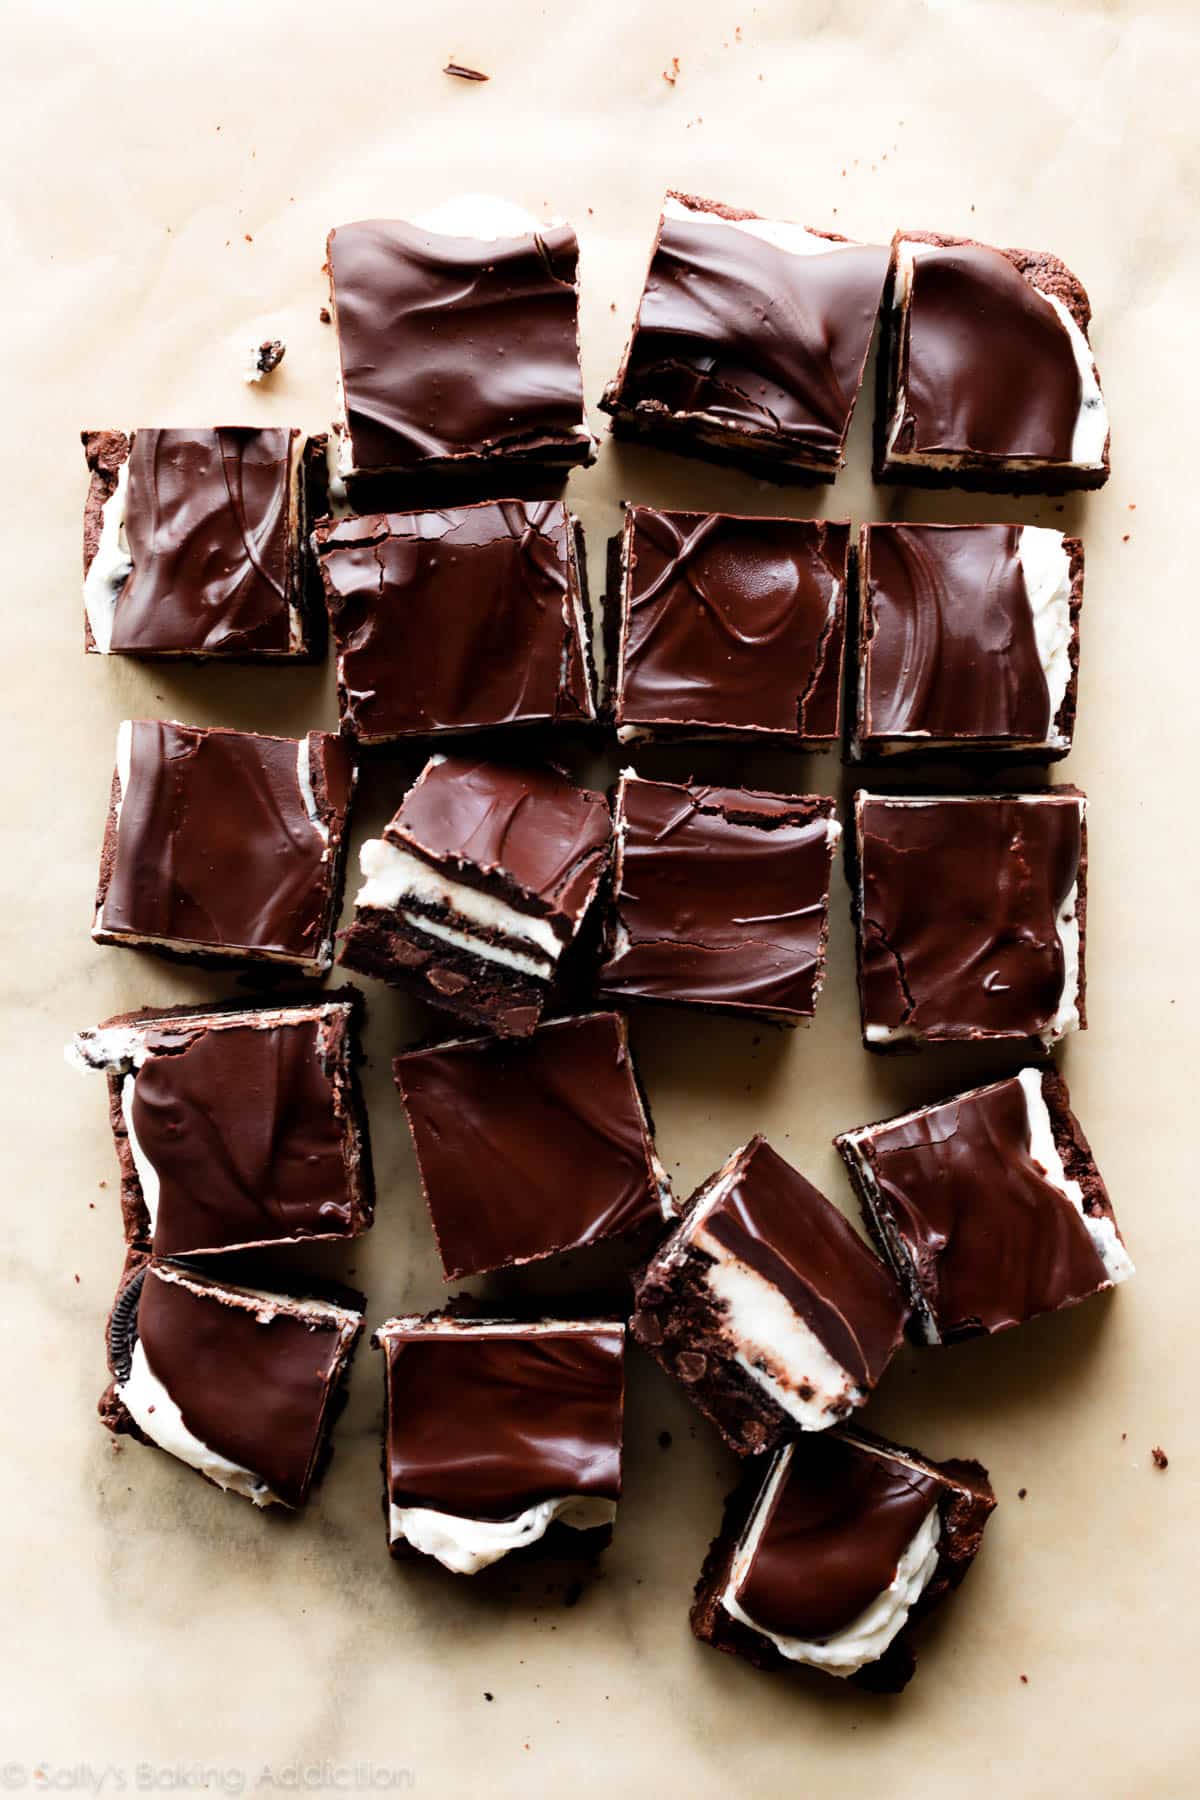 Cookies and cream Oreo brownies cut into squares